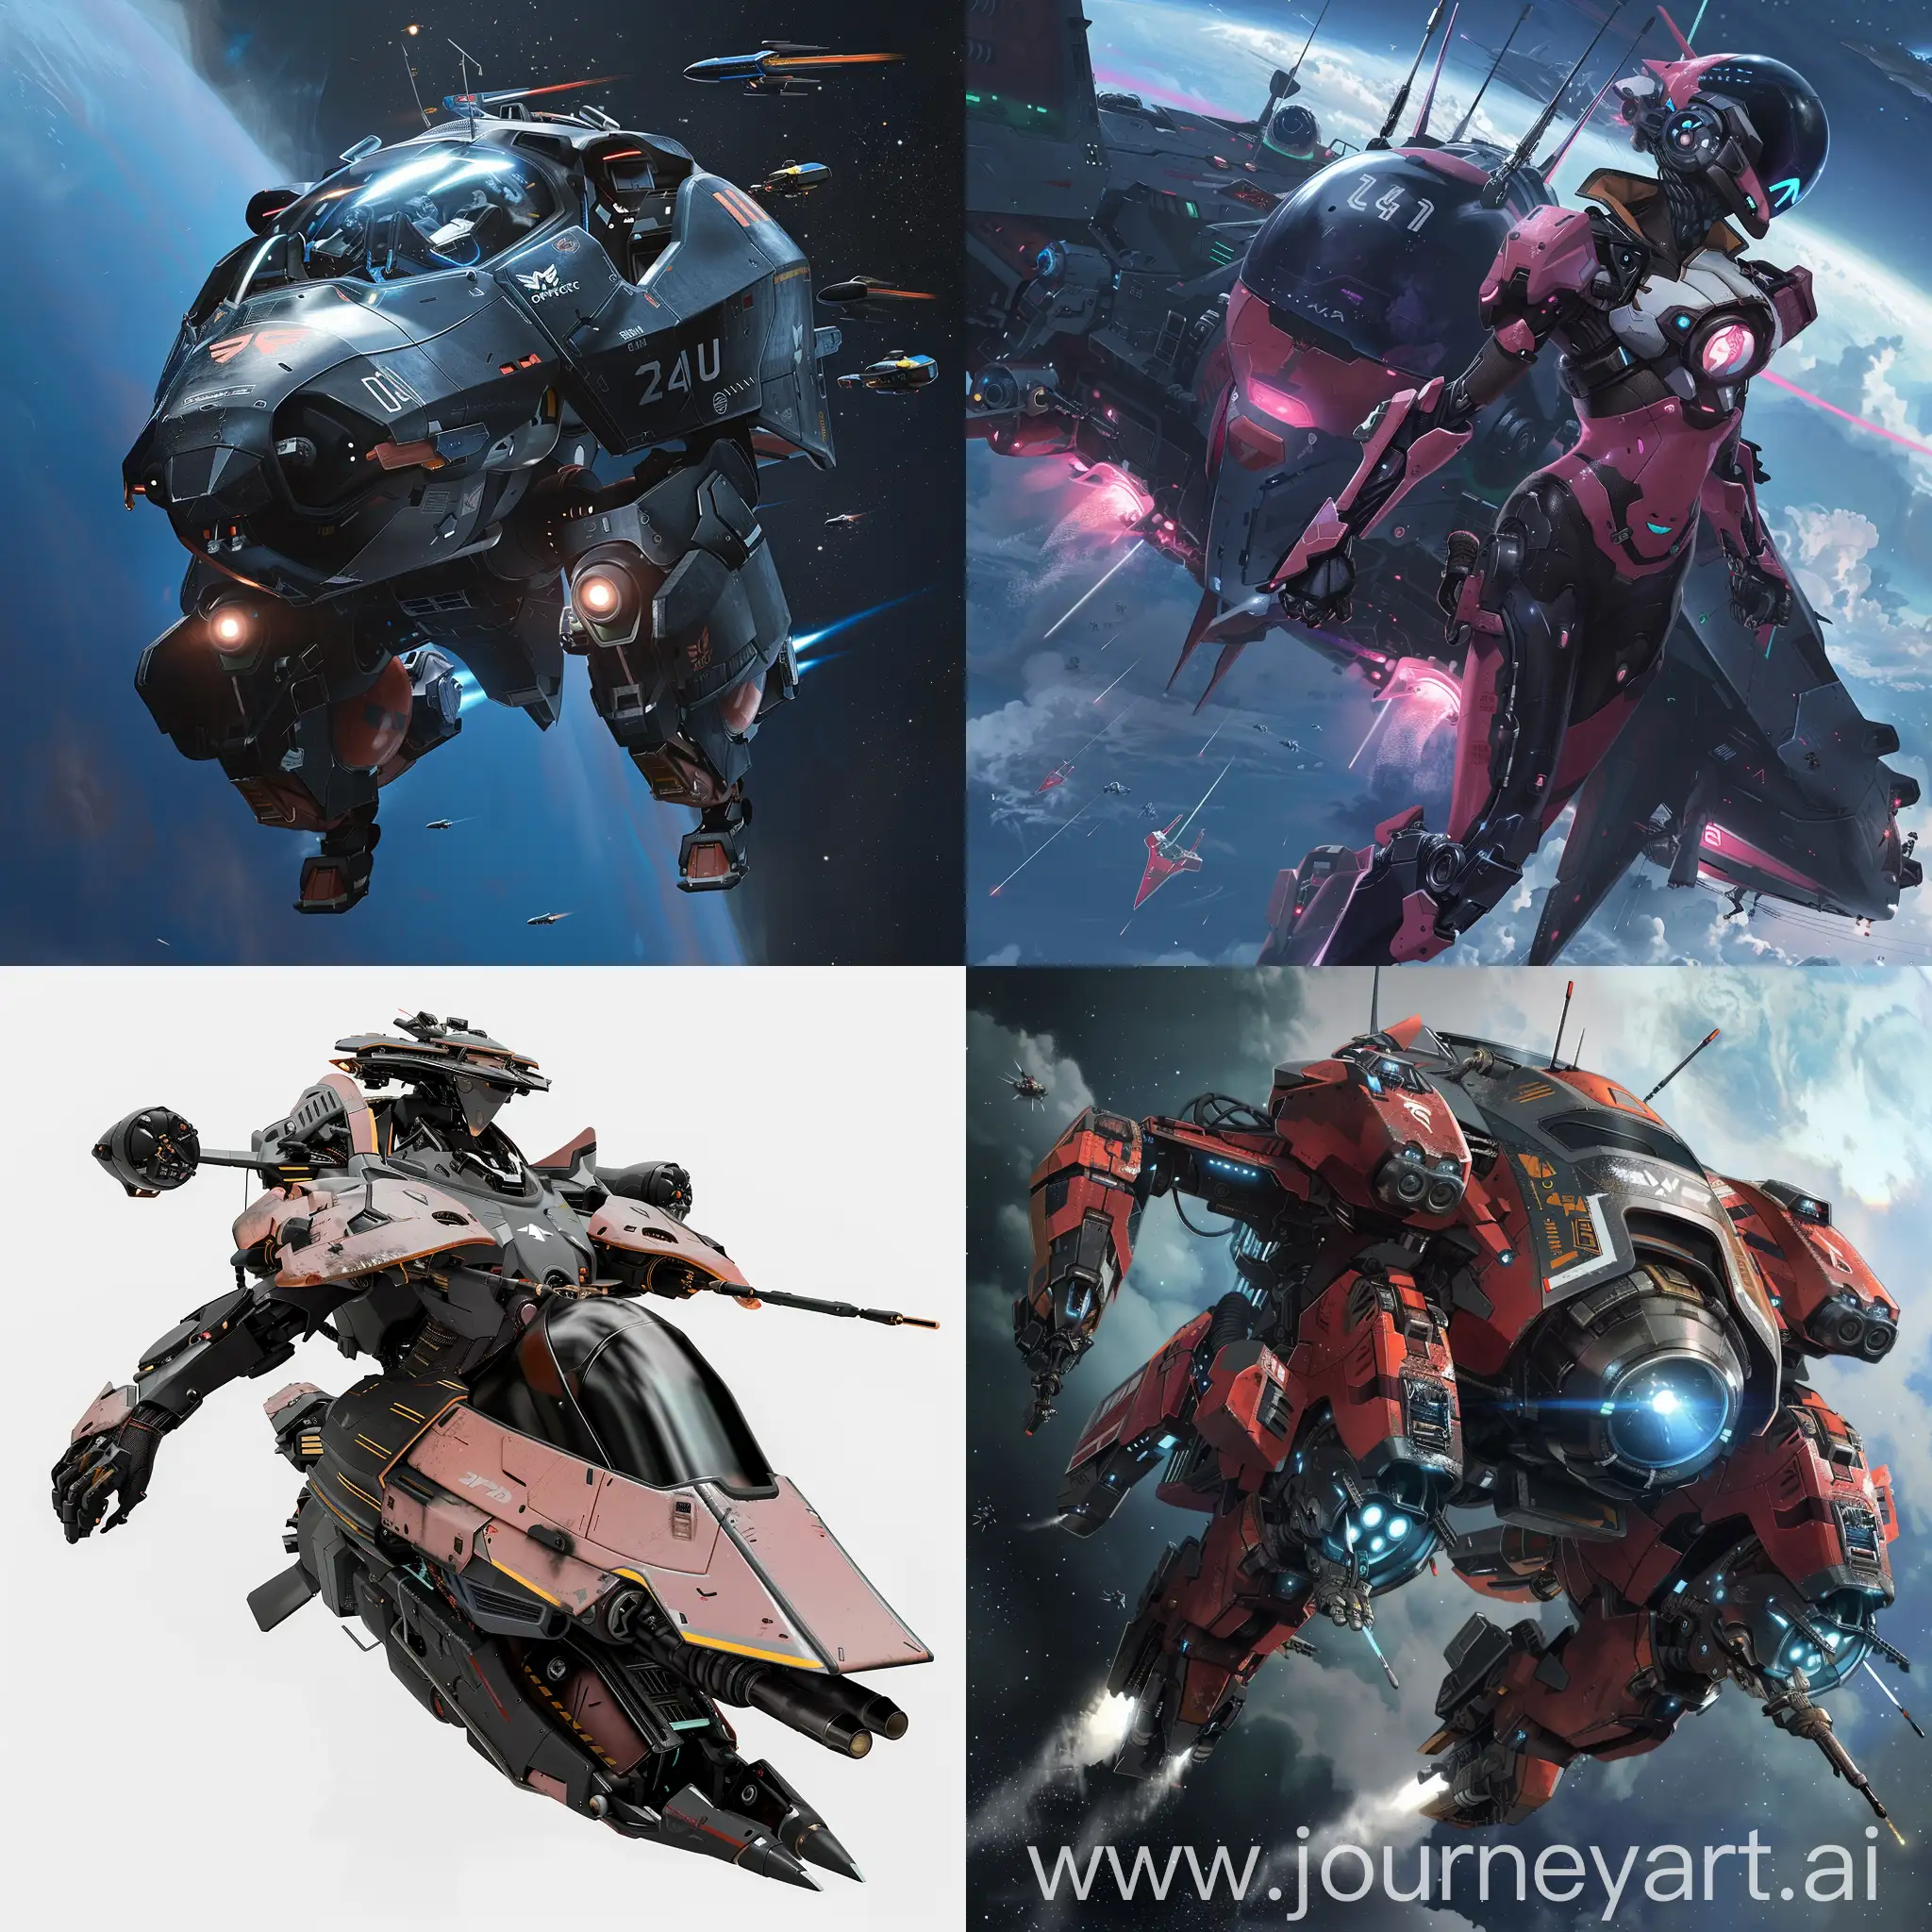 d.va mech from overwatch merged with a succubus frigate from eve online